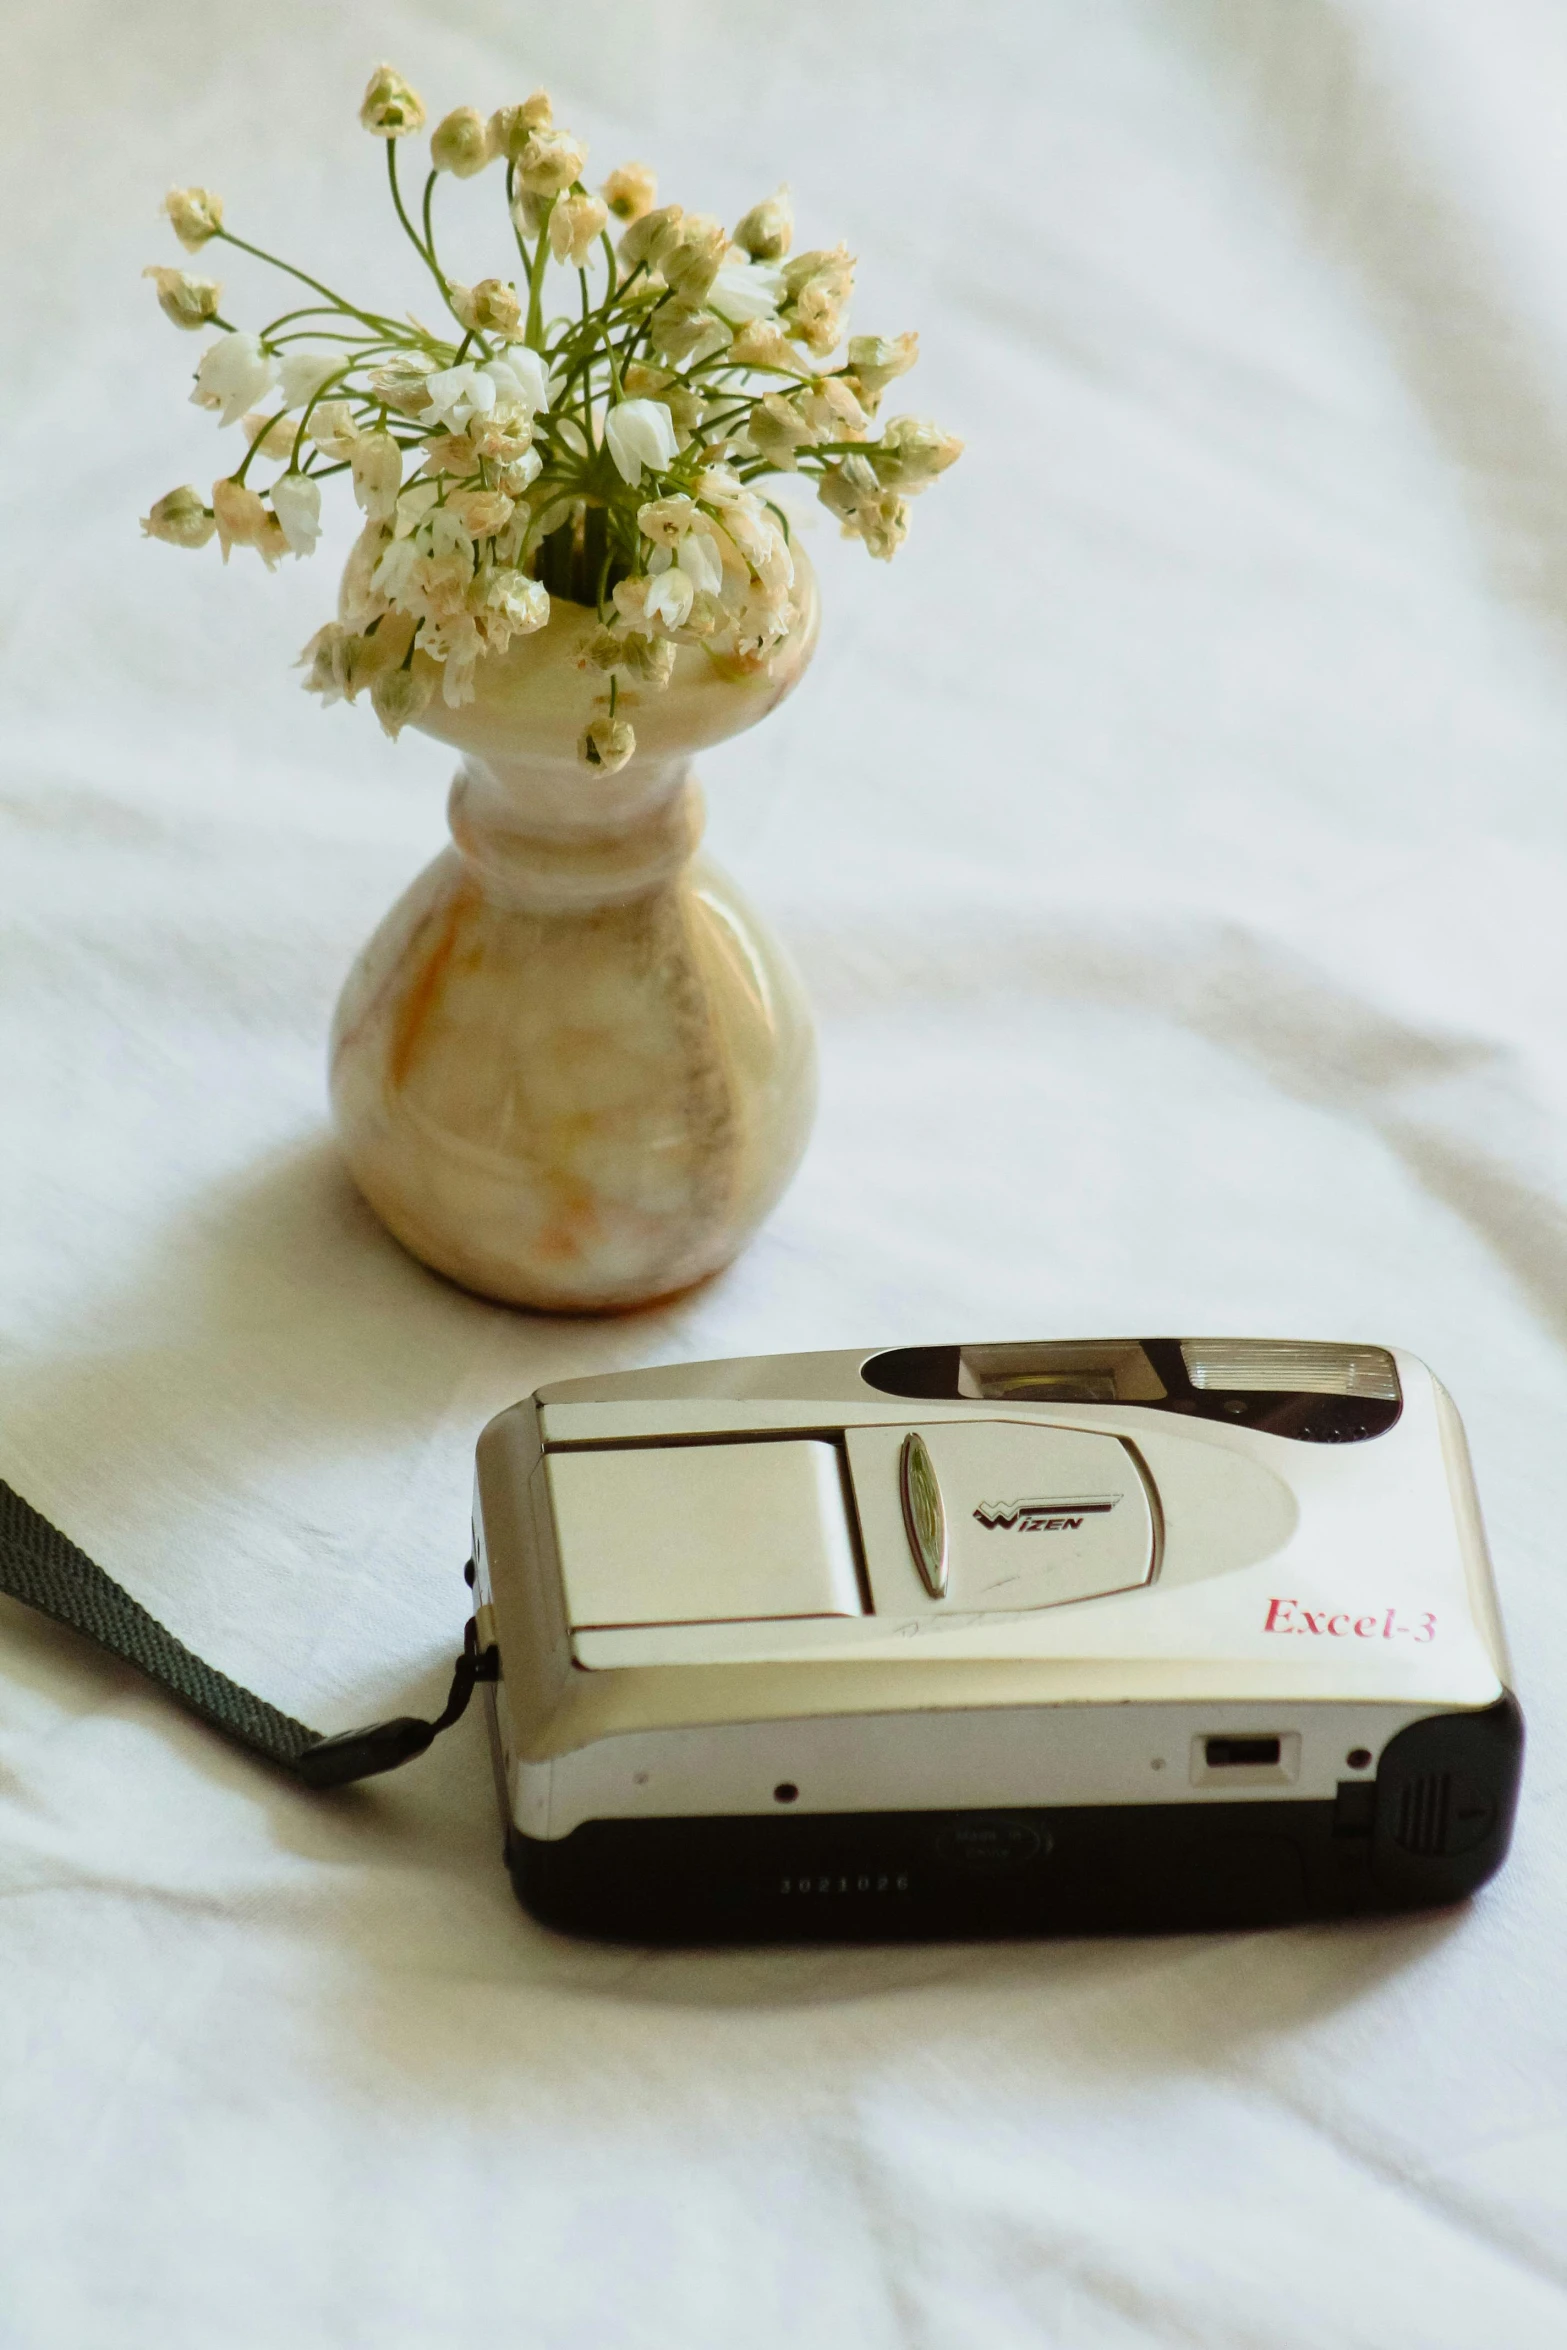 a small camera sitting next to a vase with flowers in it